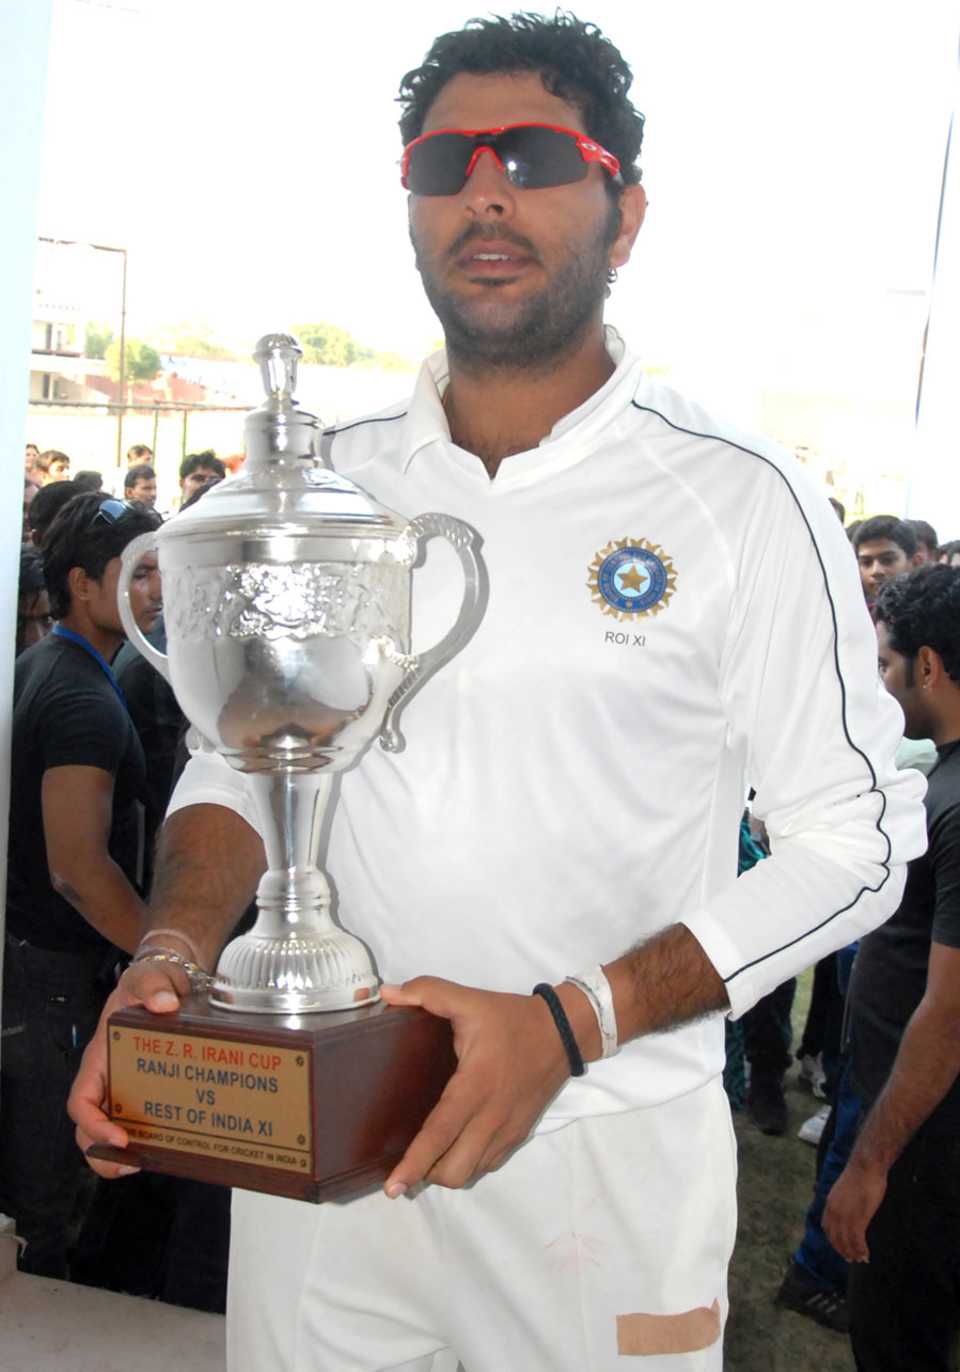 Rest of India captain Yuvraj Singh with the Irani Cup trophy